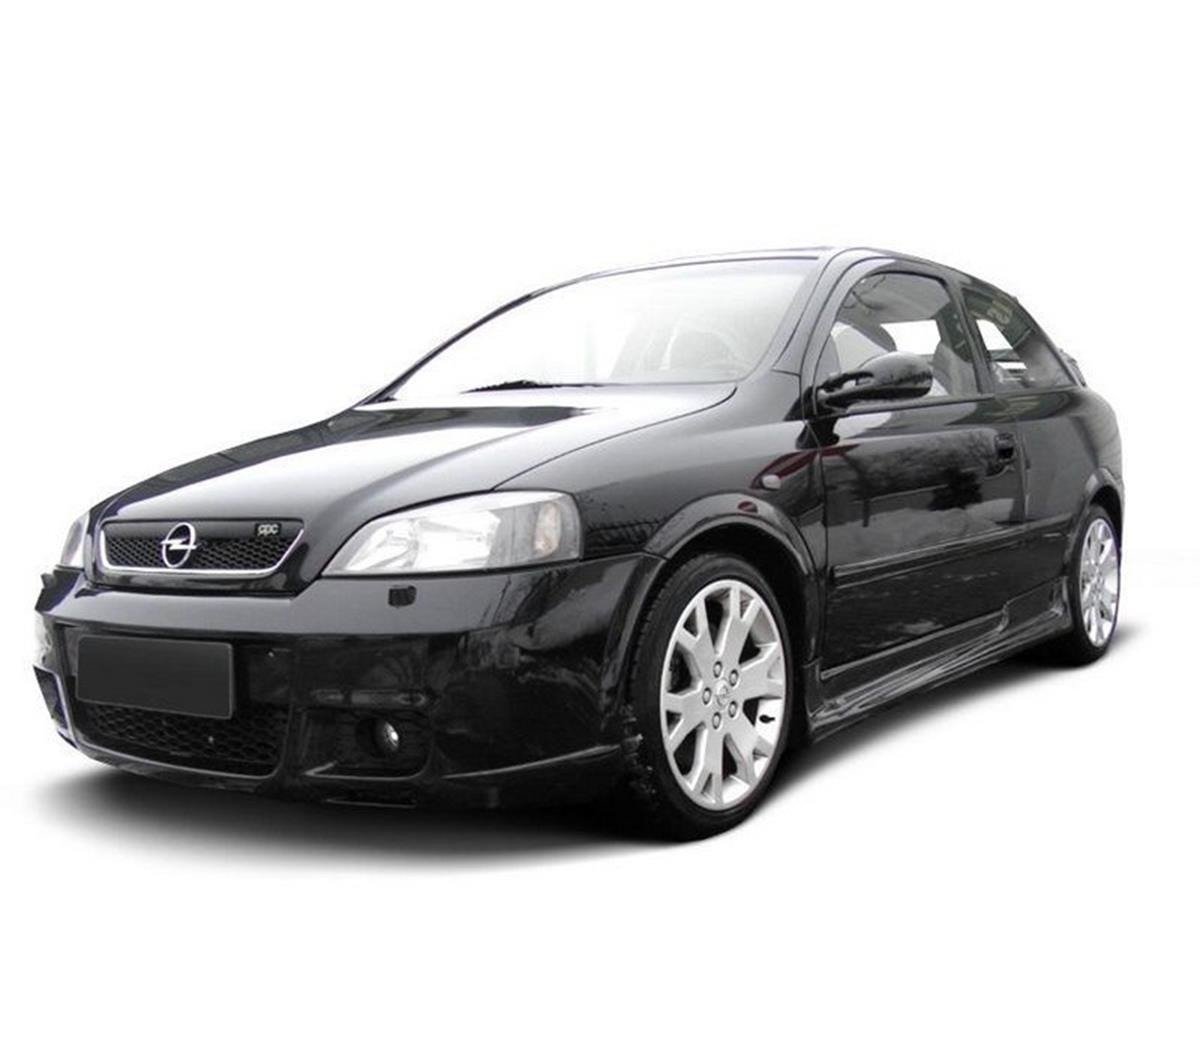 Opel Astra G Coupe (03.2000 - 05.2005)